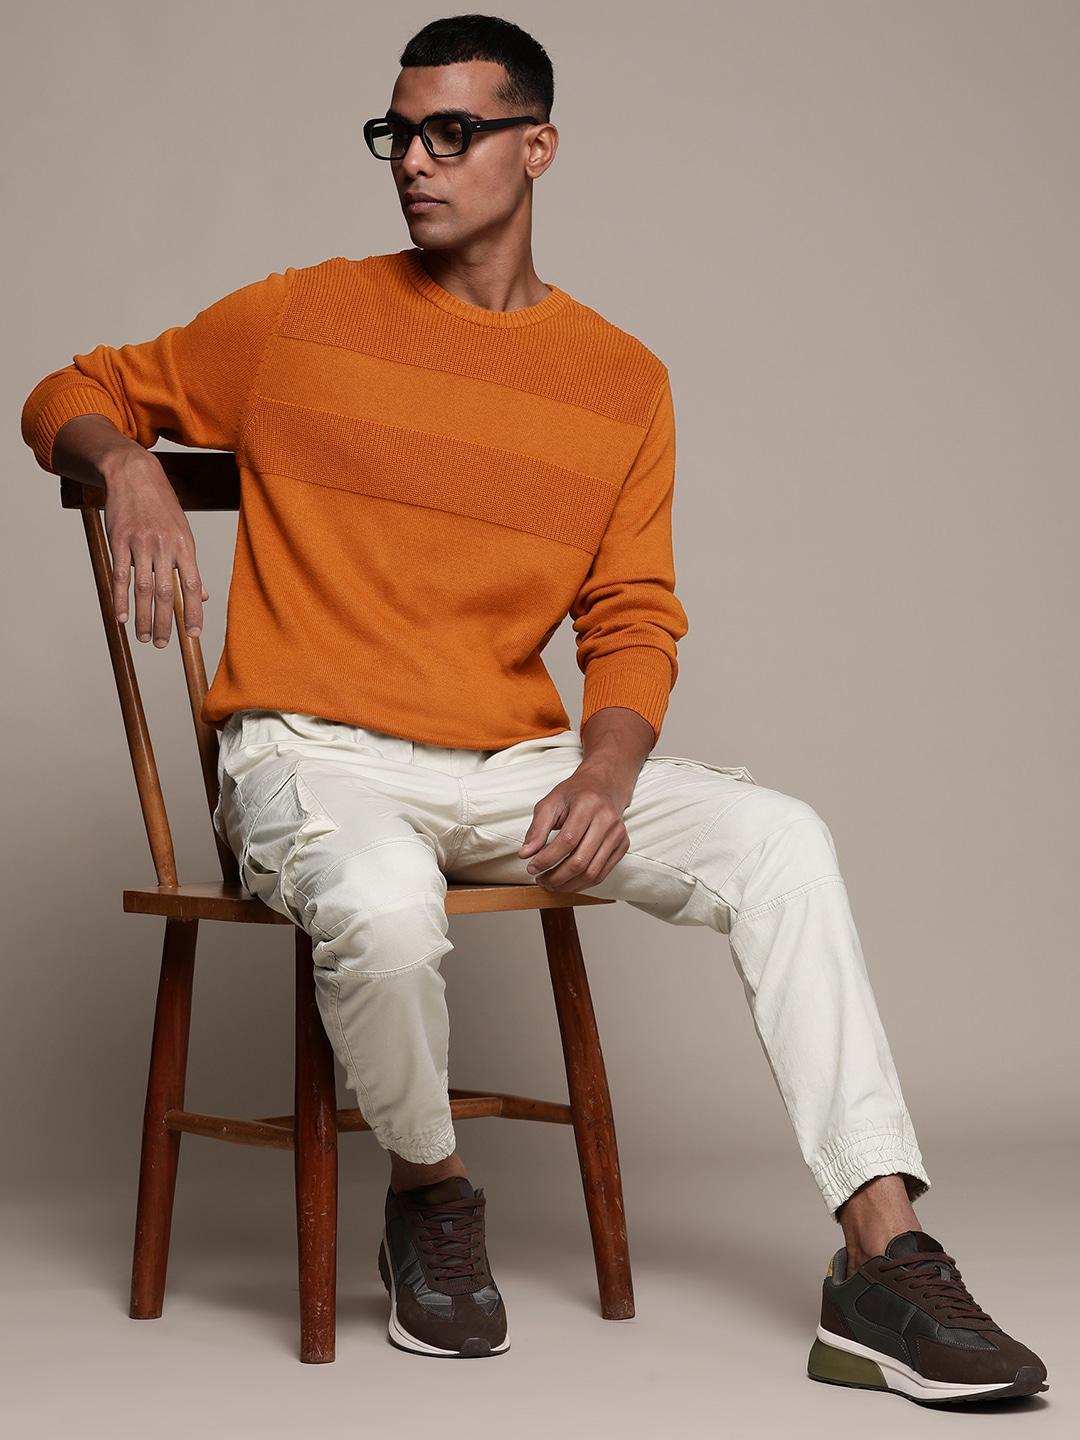 macy's-club-room-men-orange-self-striped-pure-cotton-knitted-pullover